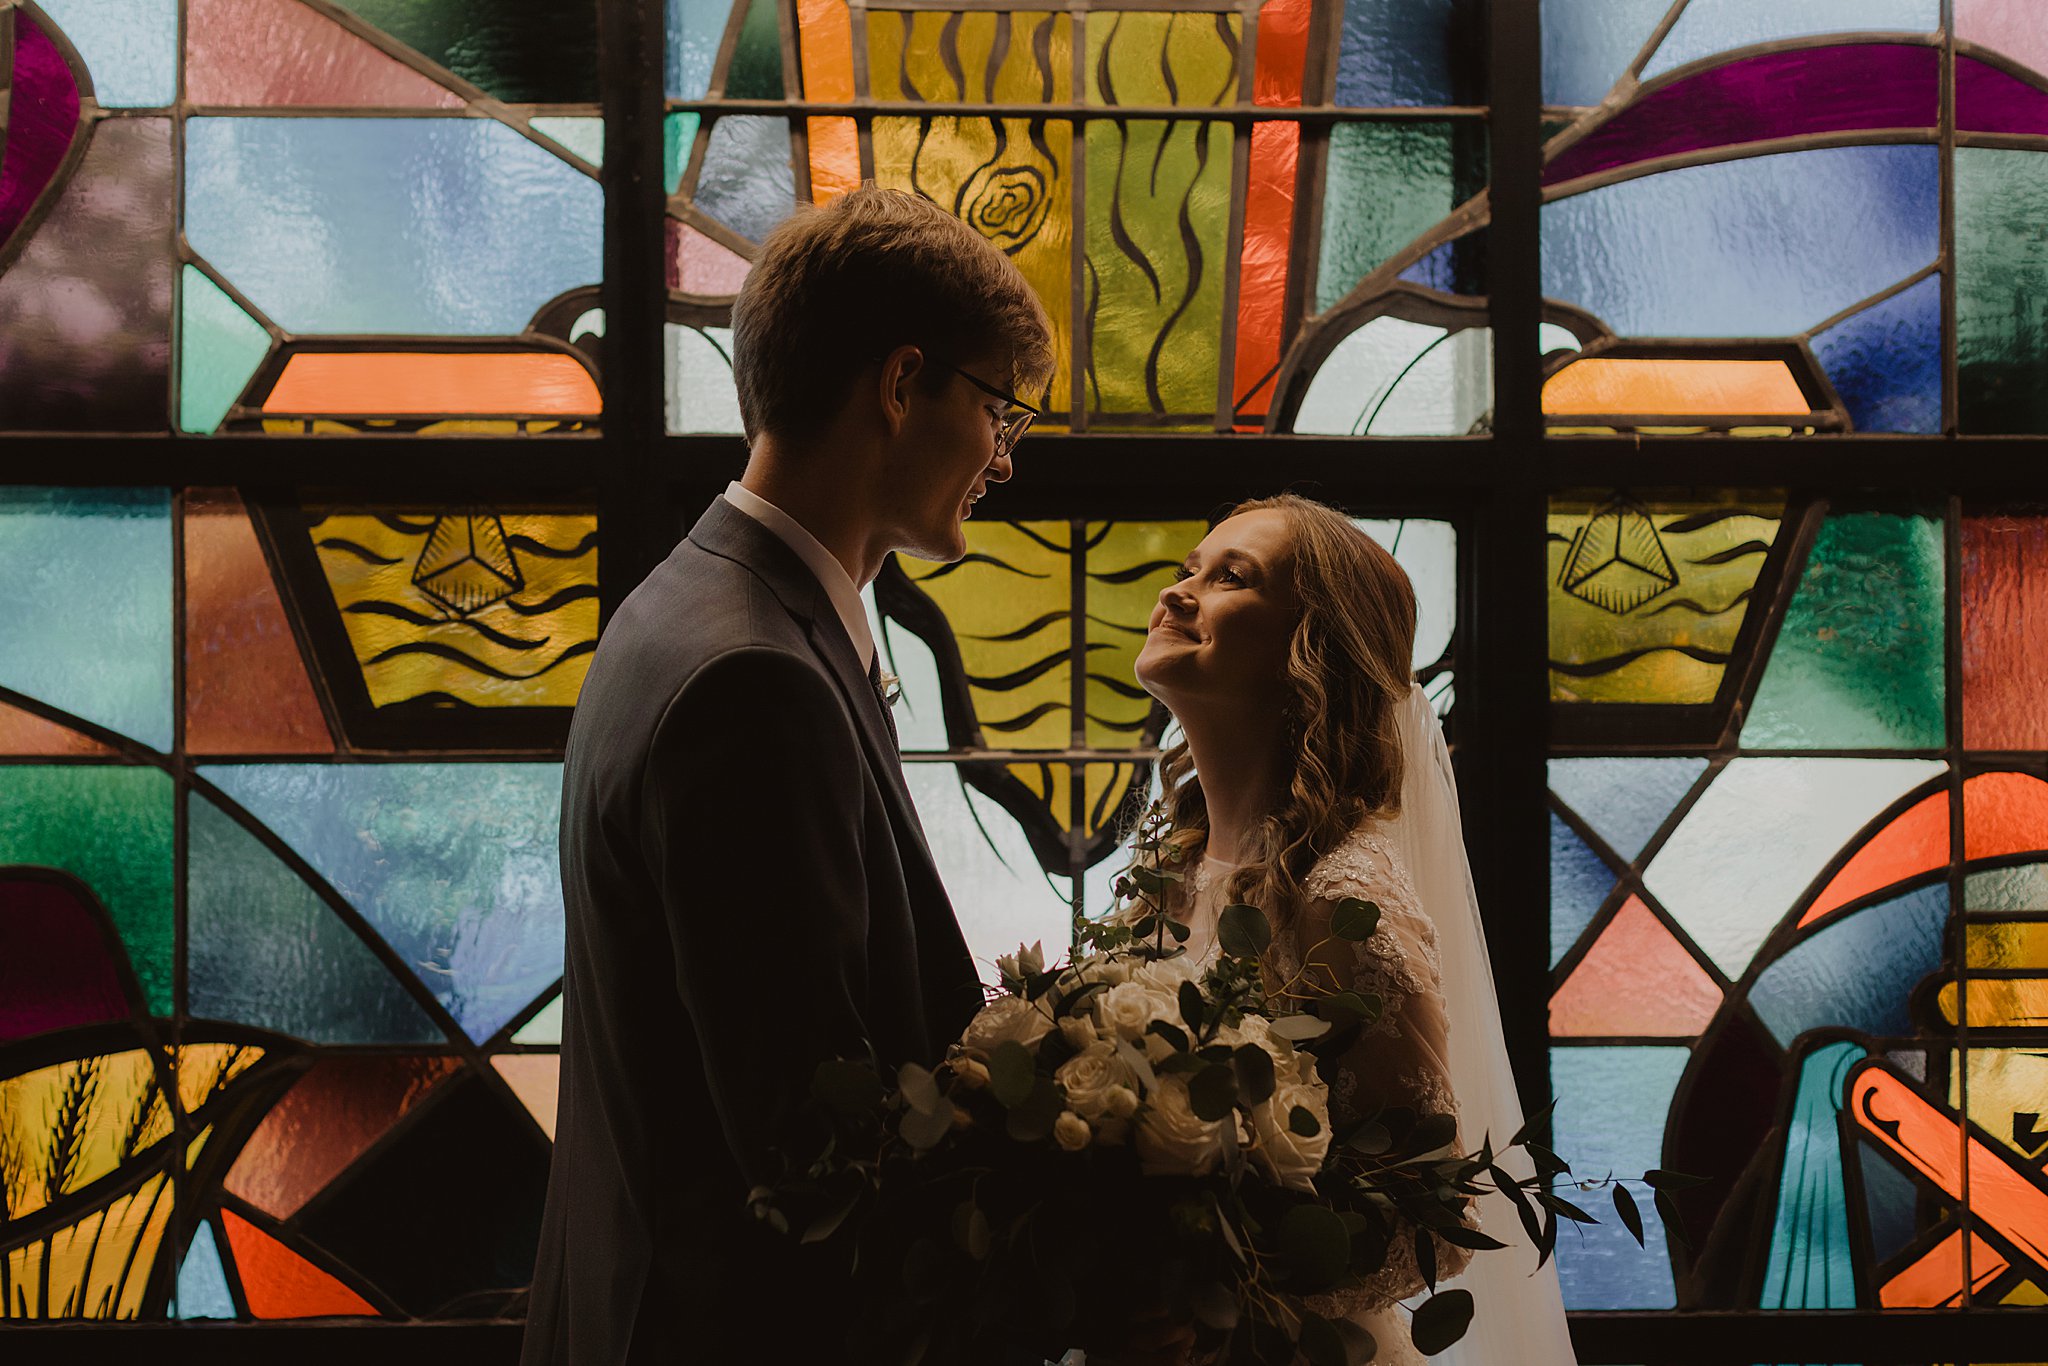 Bride and Groom in front of stained glass window